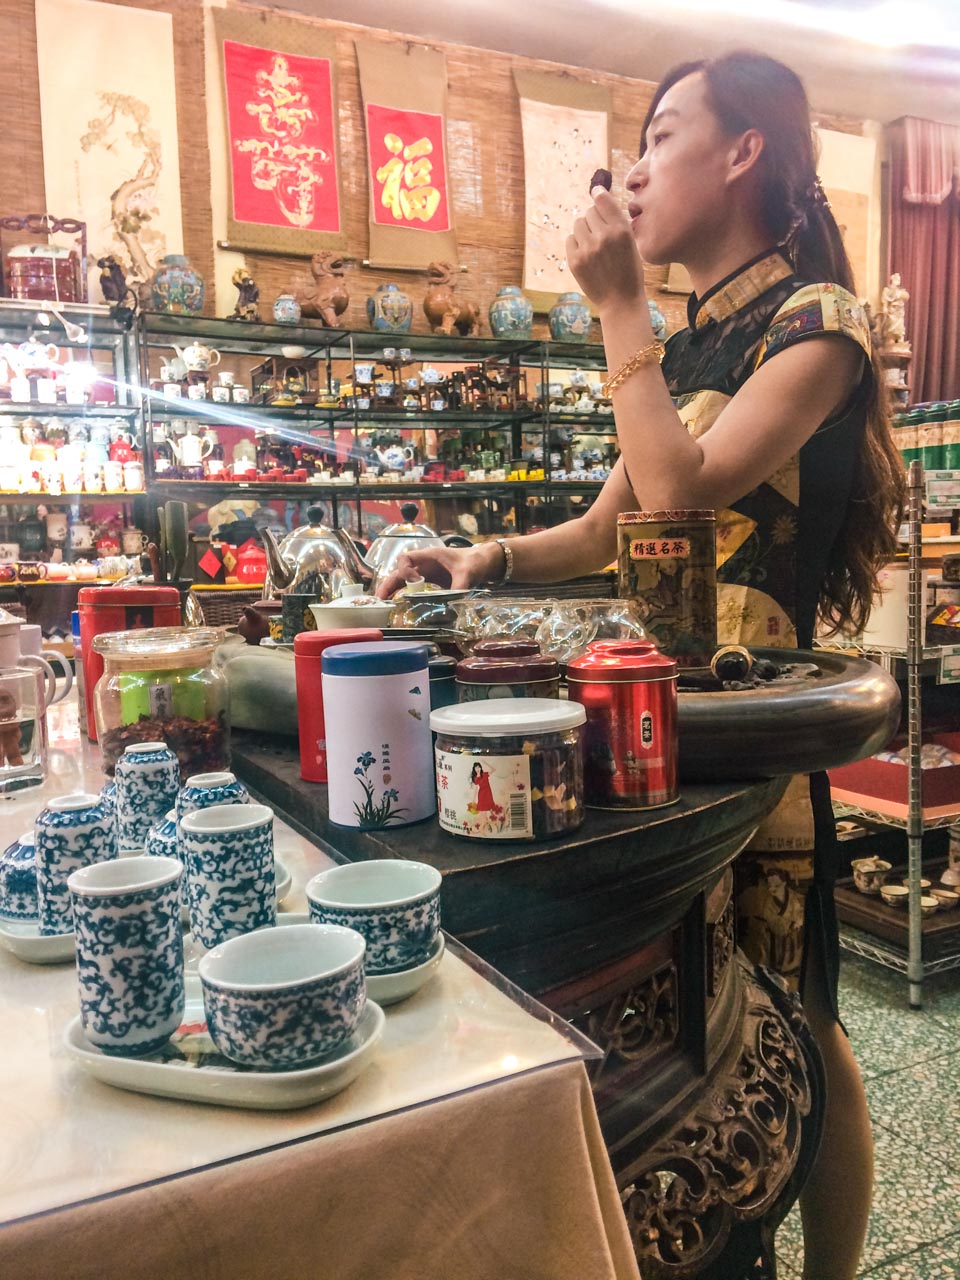 A Chinese woman holding up tea during the tea tasting ceremony at a traditional tea shop in Beijing